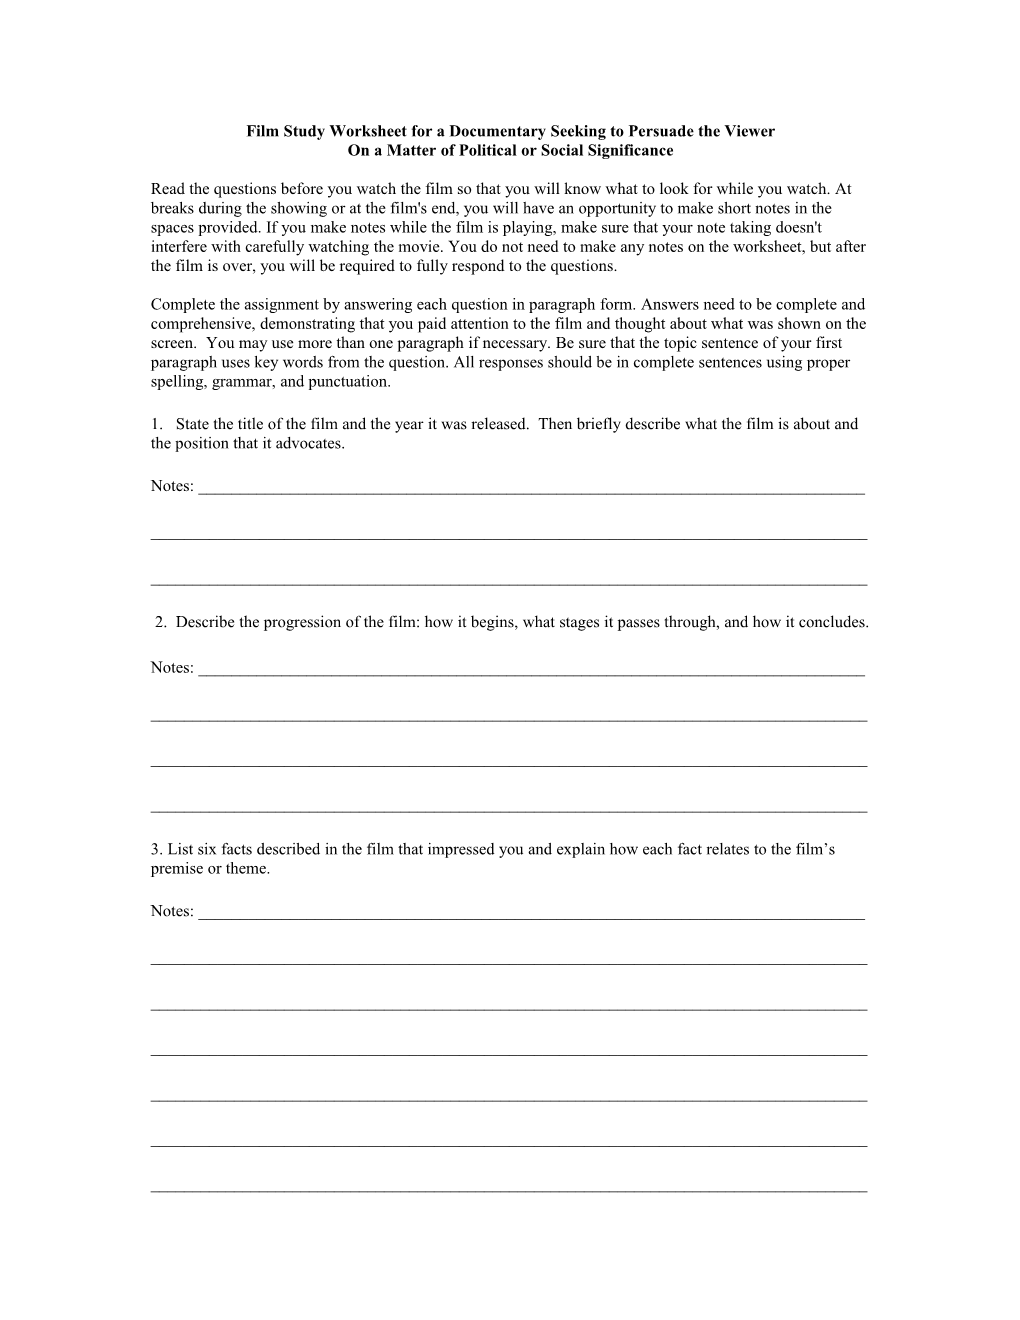 Film Study Worksheet for a Documentary Seeking to Persuade the Viewer